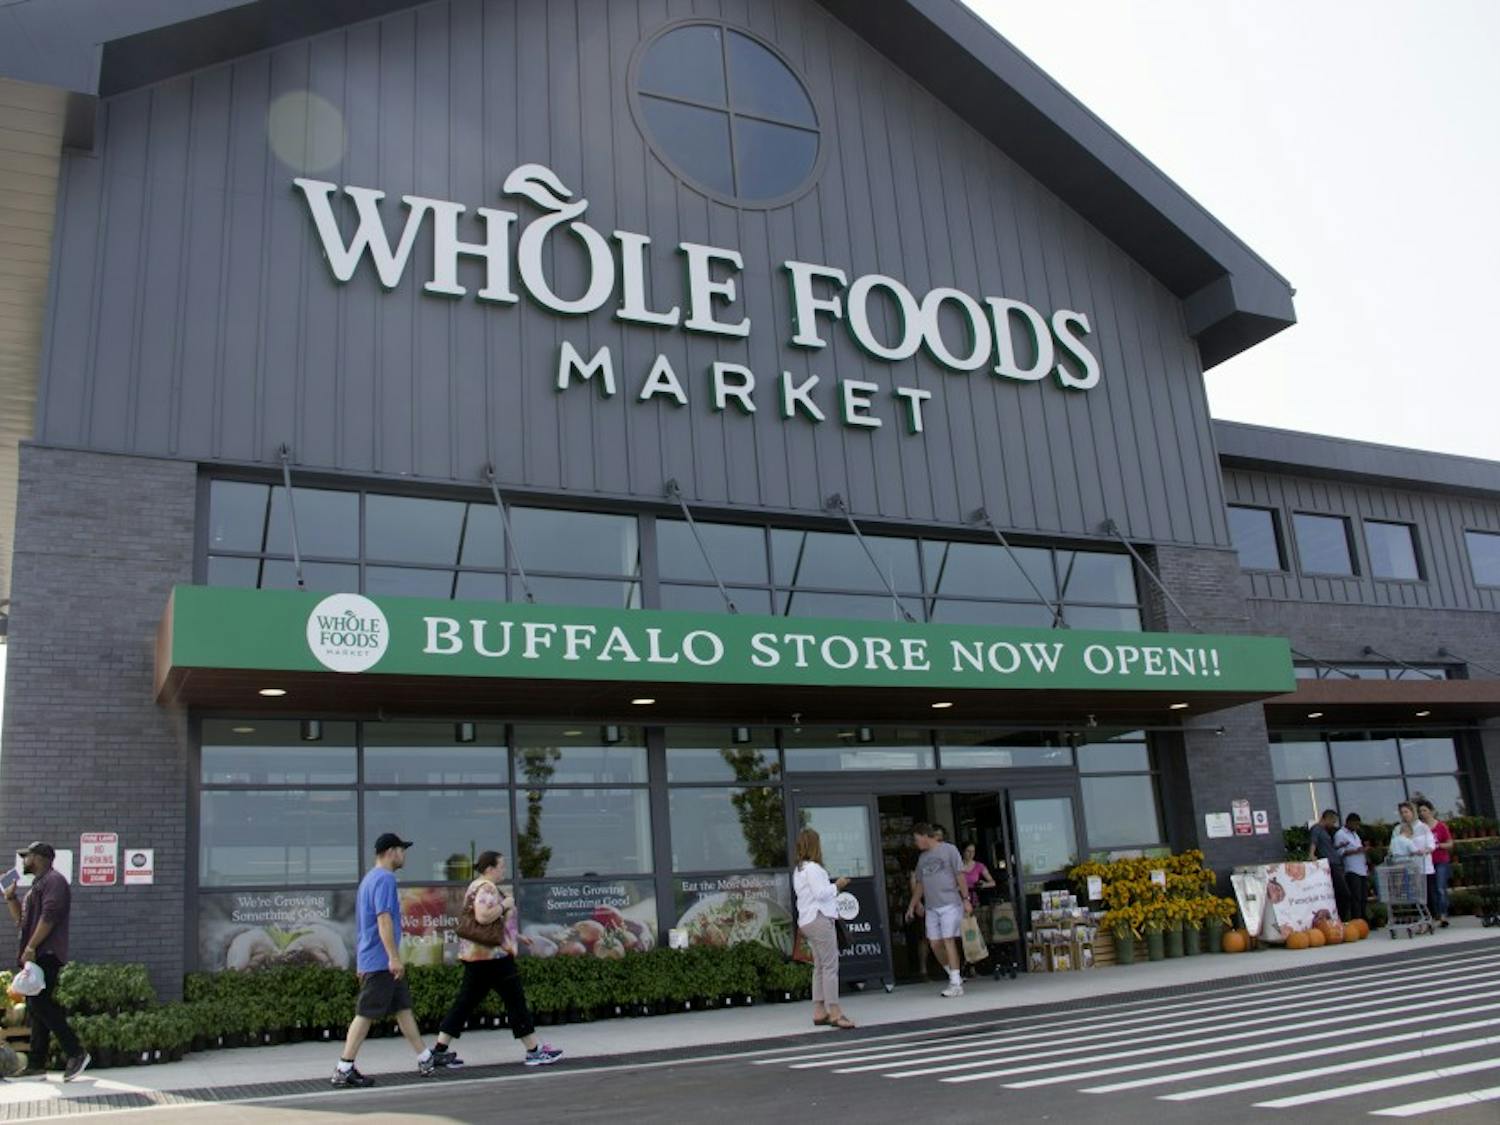 Buffalo Niagara's first Whole Foods supermarket opened its doors to a crowd of more than 400 people Friday morning. People waited in line for their fair share of opening day sales and giveaways.